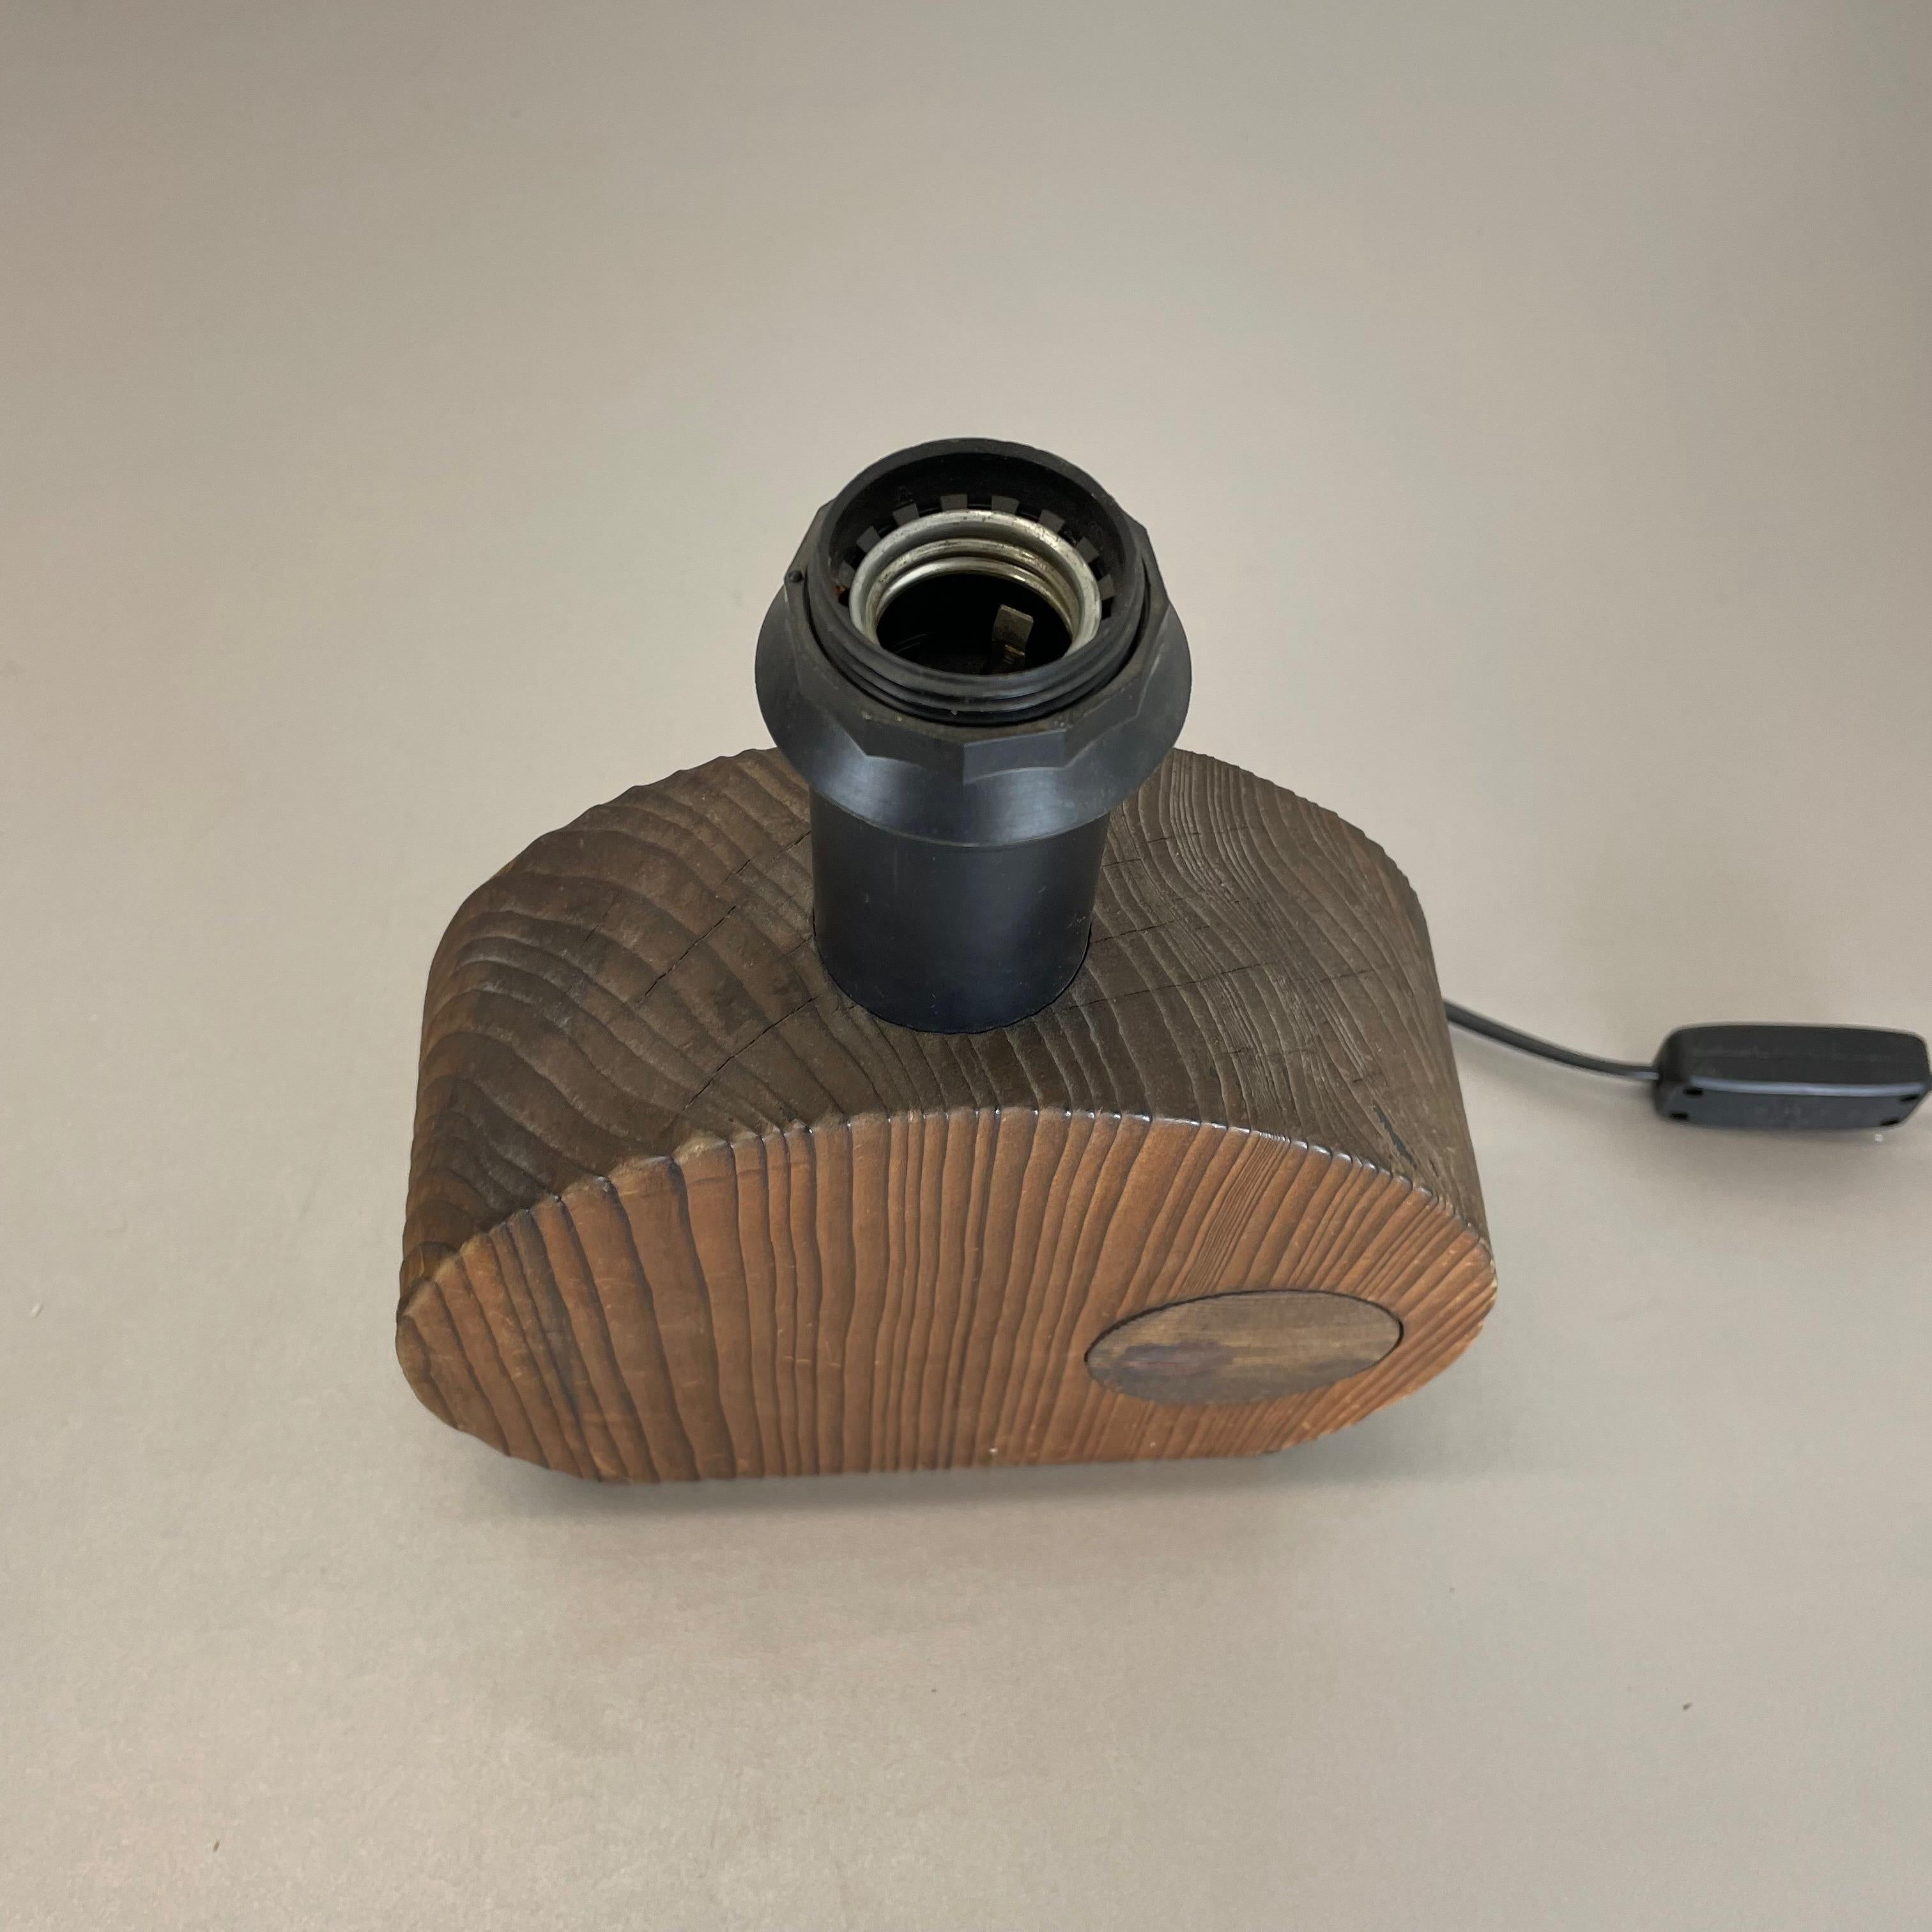 Organic Sculptural Wooden Table Light Made Temde Lights, Germany, 1970s For Sale 2